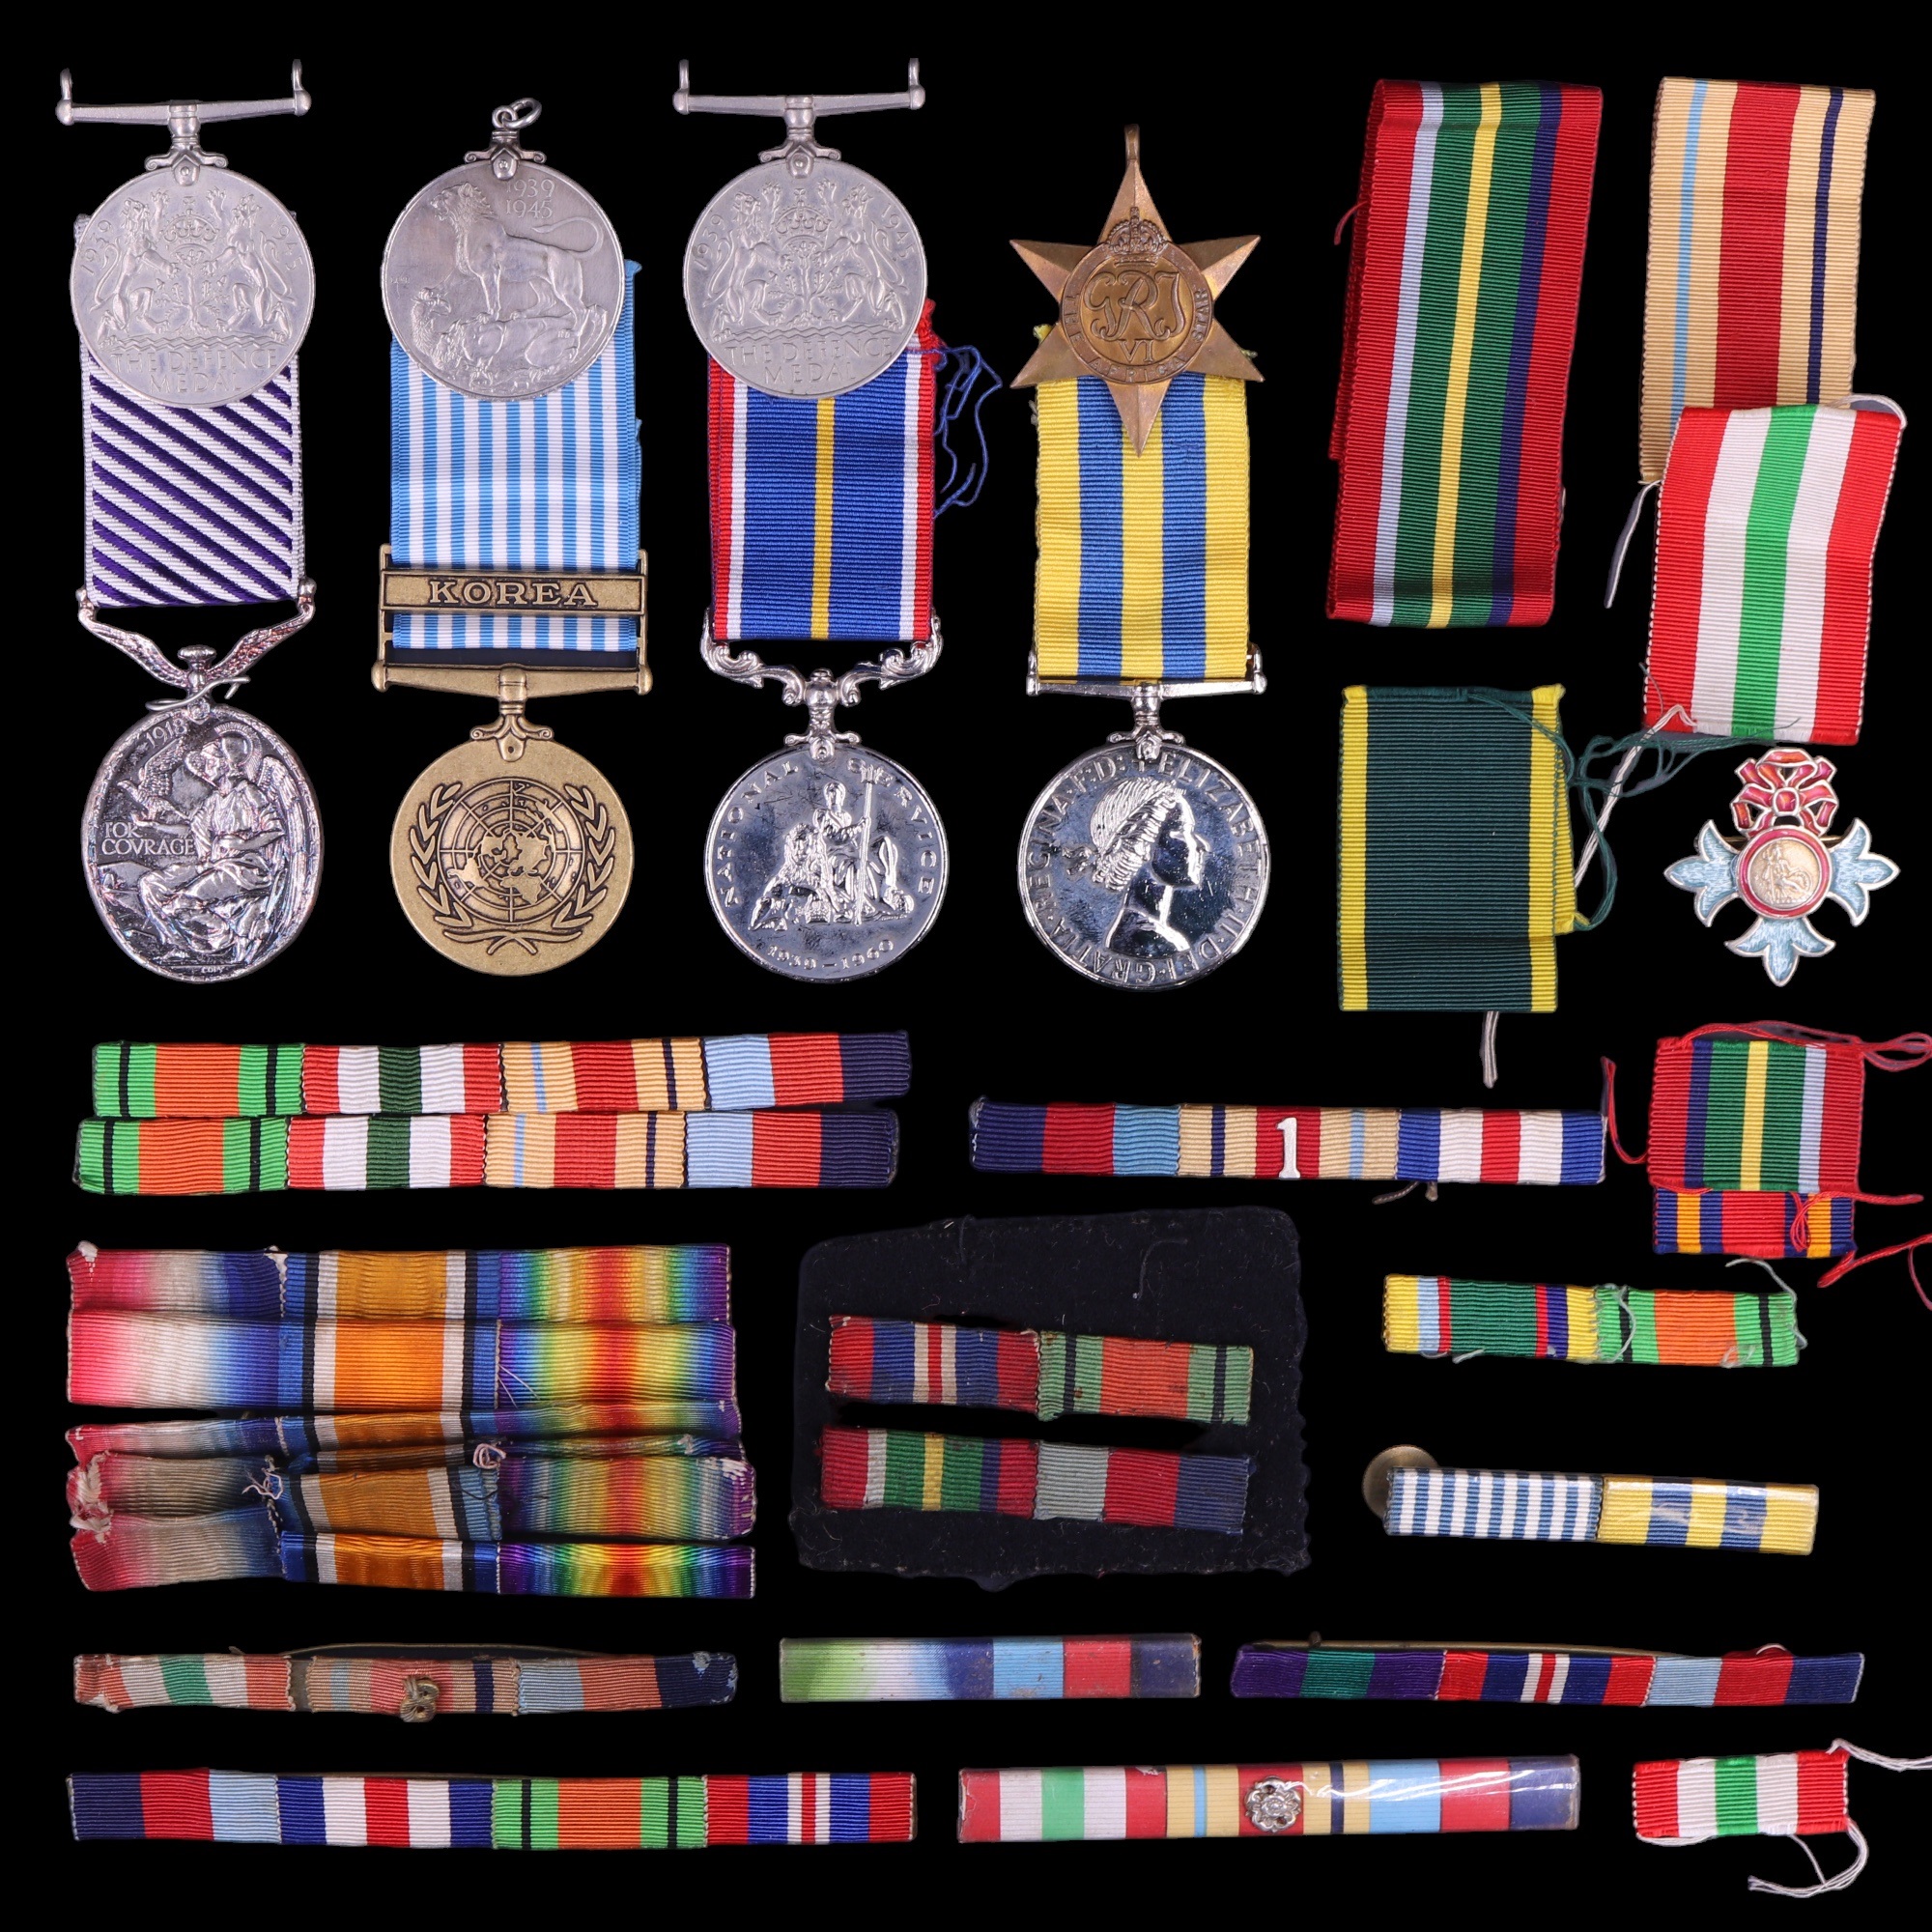 Medal ribbons and ribbon bars together with replica and other medals